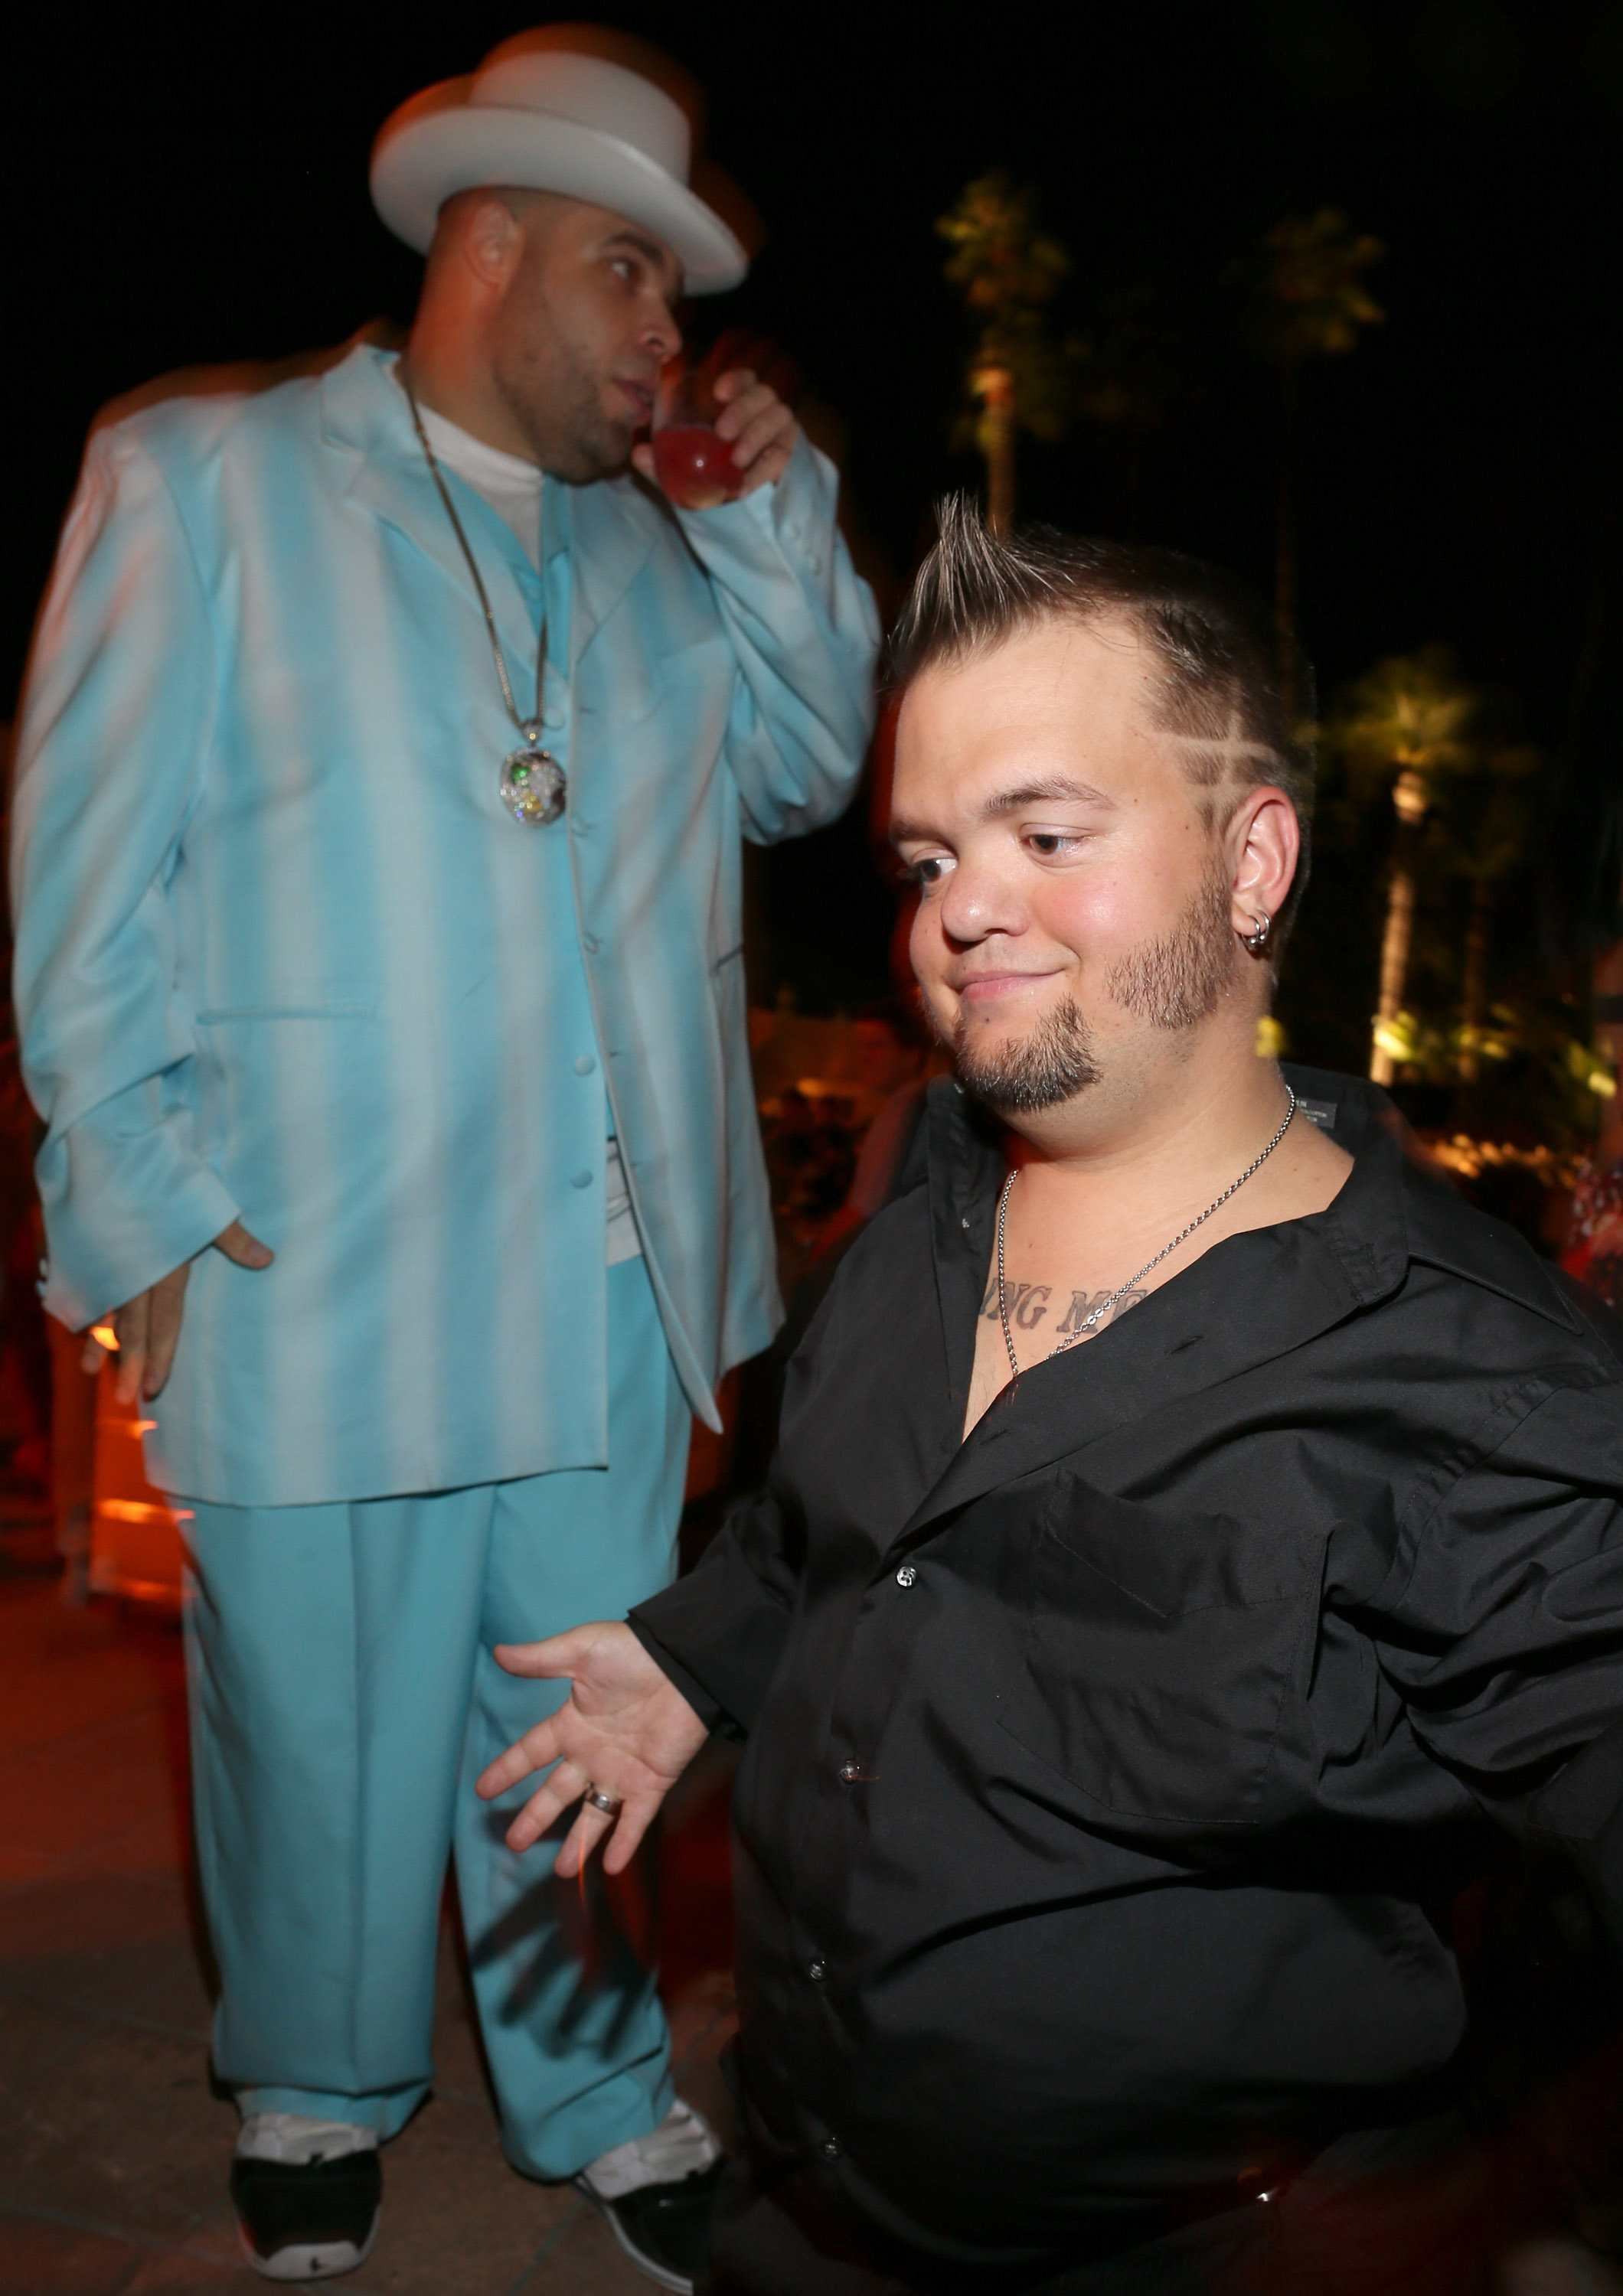 Hornswoggle & Brodus Clay